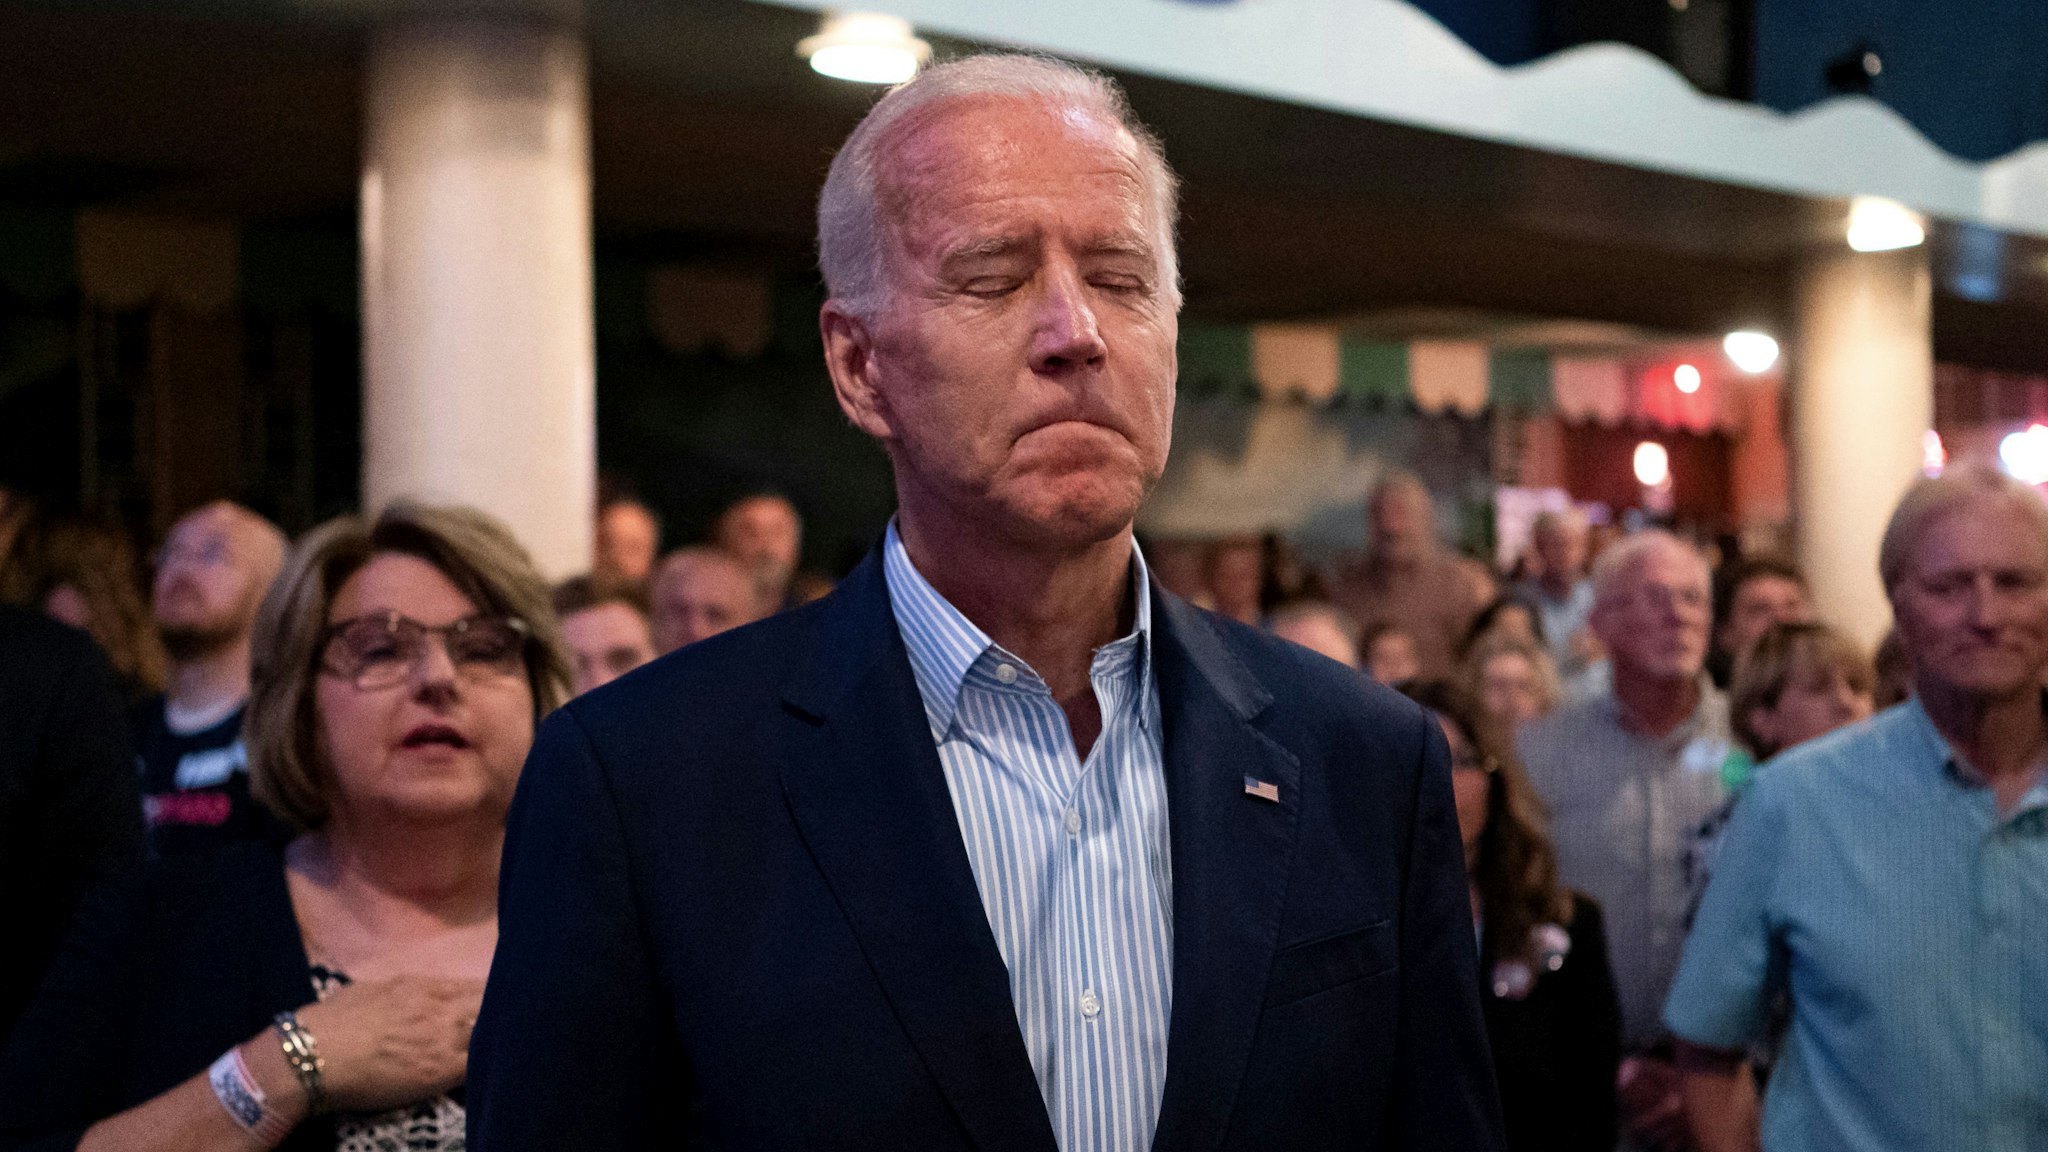 2020 Democratic presidential hopeful former Vice President Joe Biden stands for the National Anthem at the Wing Ding Dinner on August 9, 2019 in Clear Lake, Iowa. - The dinner has become a must attend for Democratic presidential hopefuls ahead of the of Iowa Caucus.